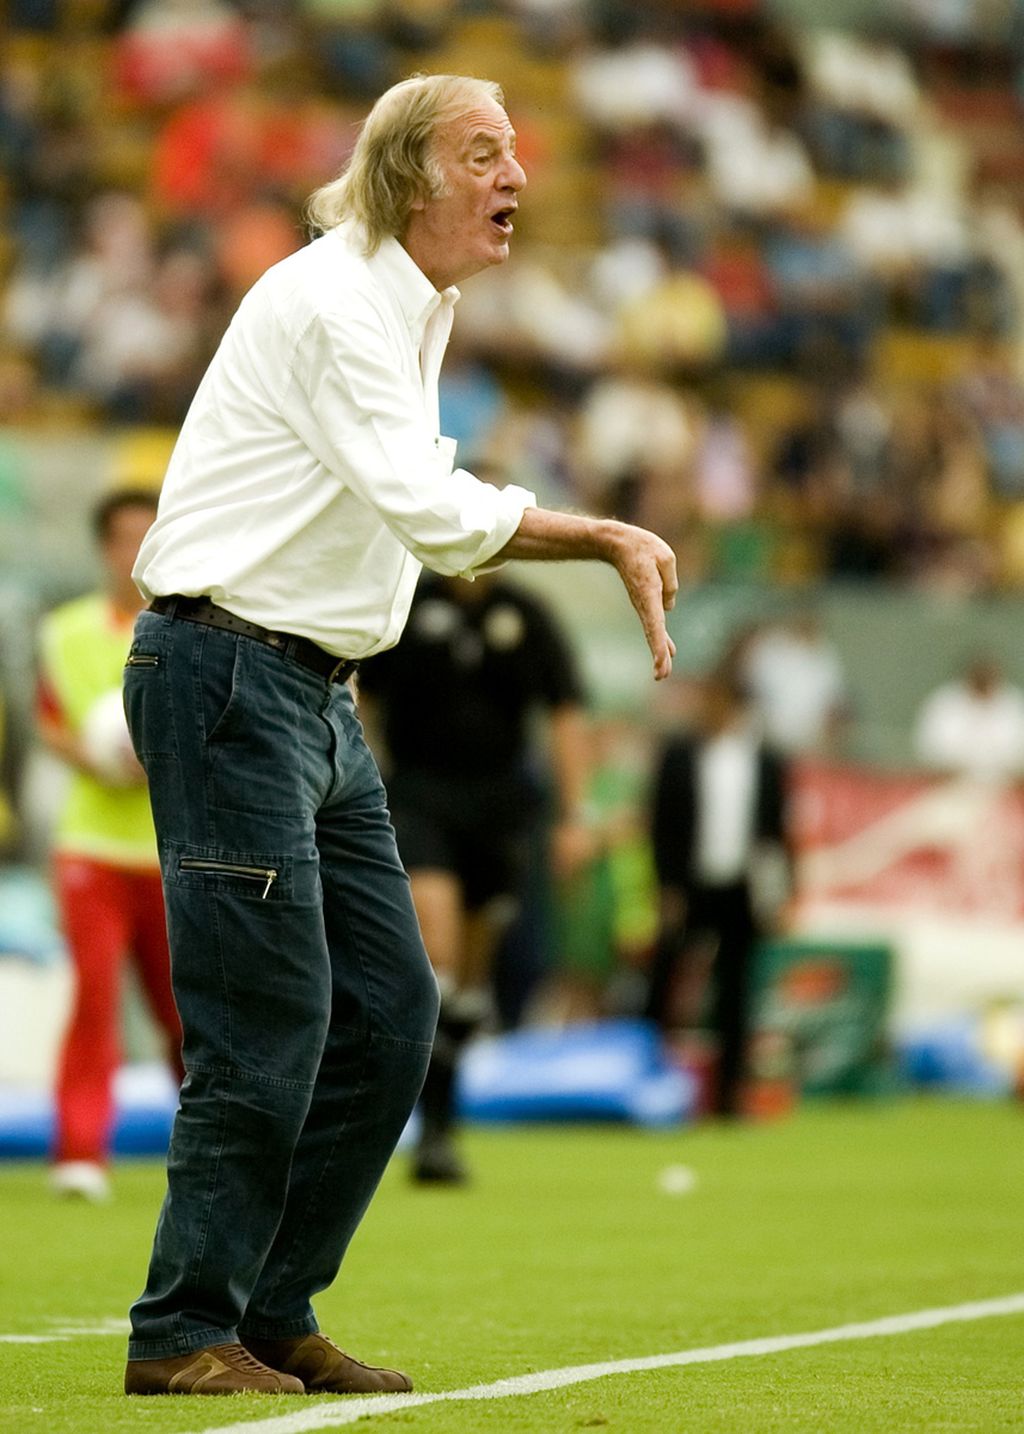 Argentinian coach, Cesar Luis Menotti, giving directions during a Mexican League football match in Guadalajara, Mexico on September 7, 2007. The charismatic coach who led Argentina to win the 1978 World Cup passed away at the age of 85 on Monday morning, May 6, 2024 WIB.